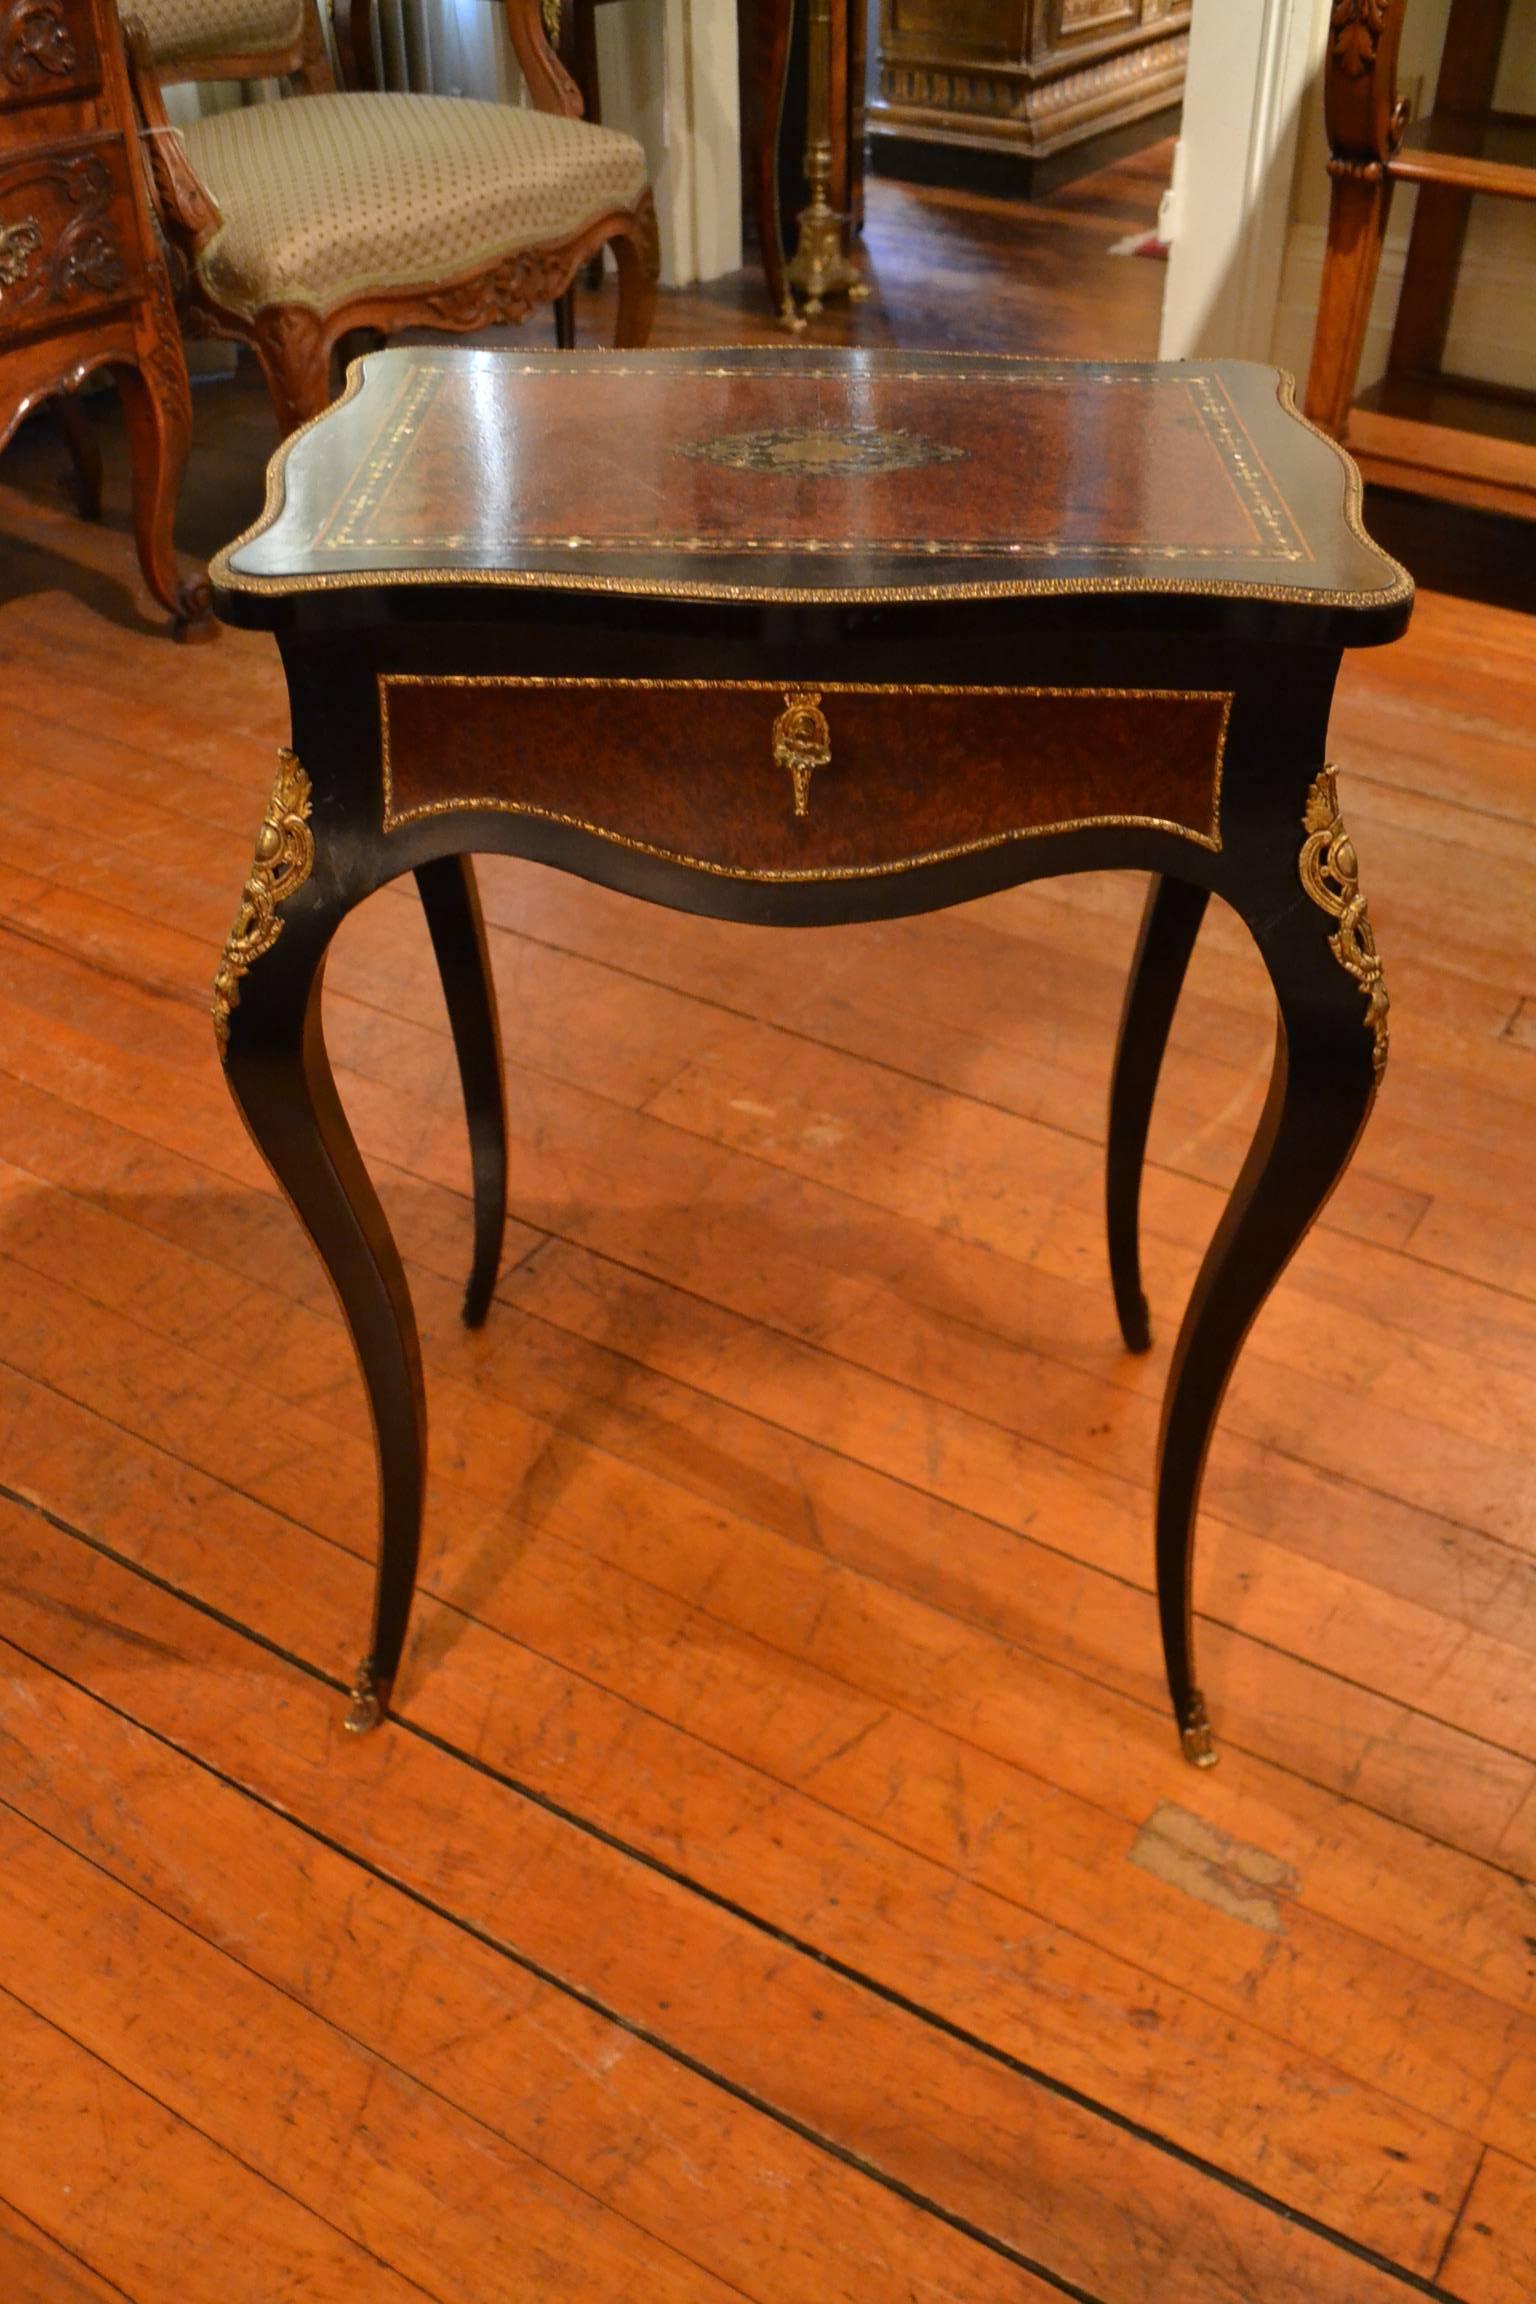 Antique French Napoleon III Inlaid Wood Gold Ormolu Dressing Table, circa 1860 For Sale 1